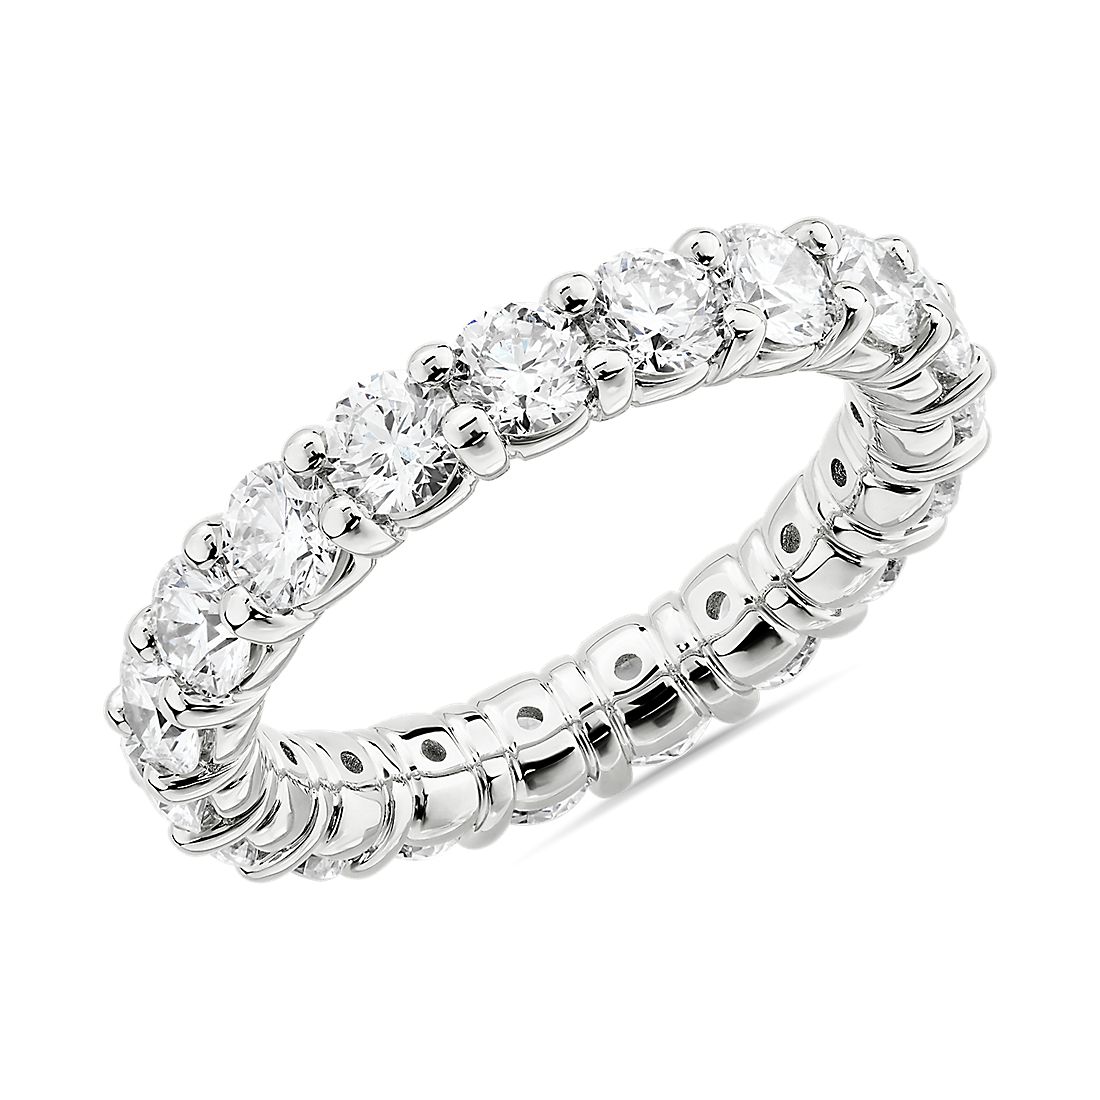 Comfort Fit Round Brilliant Diamond Eternity Ring in 14k White Gold (3 ct. tw.)